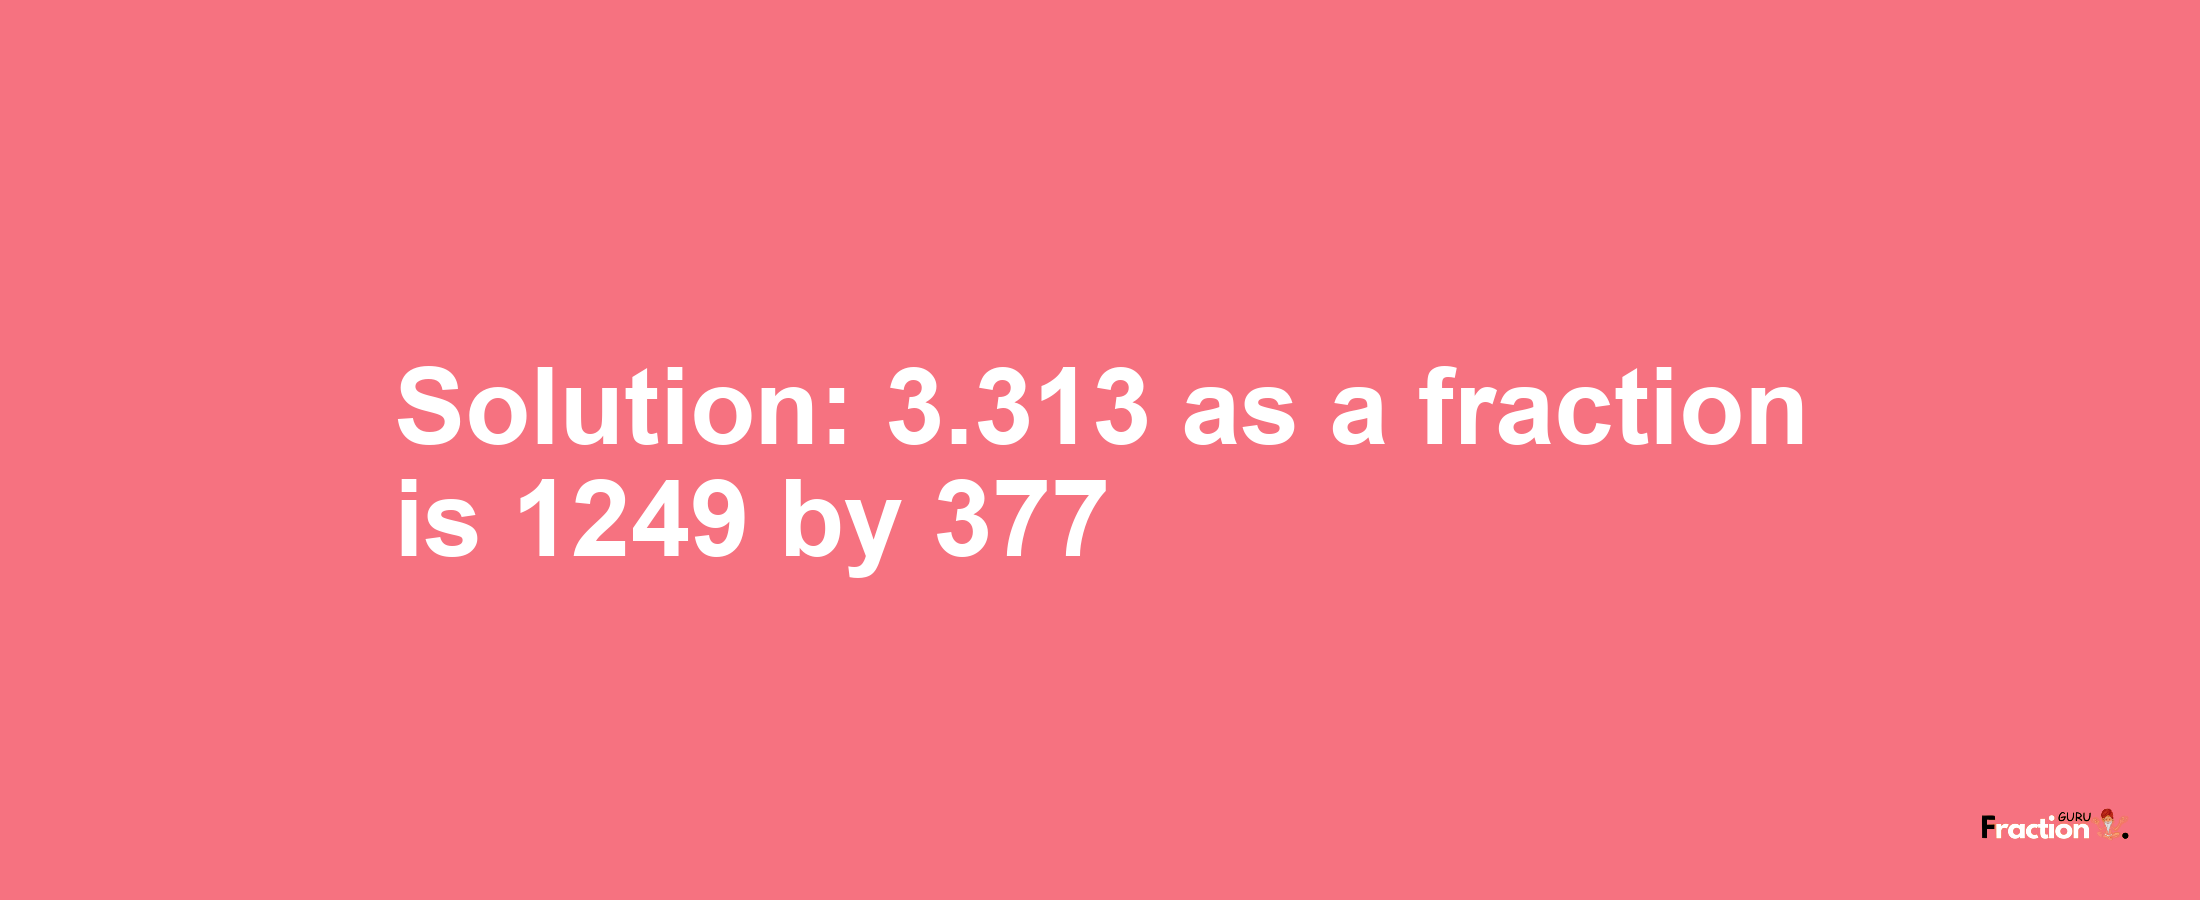 Solution:3.313 as a fraction is 1249/377